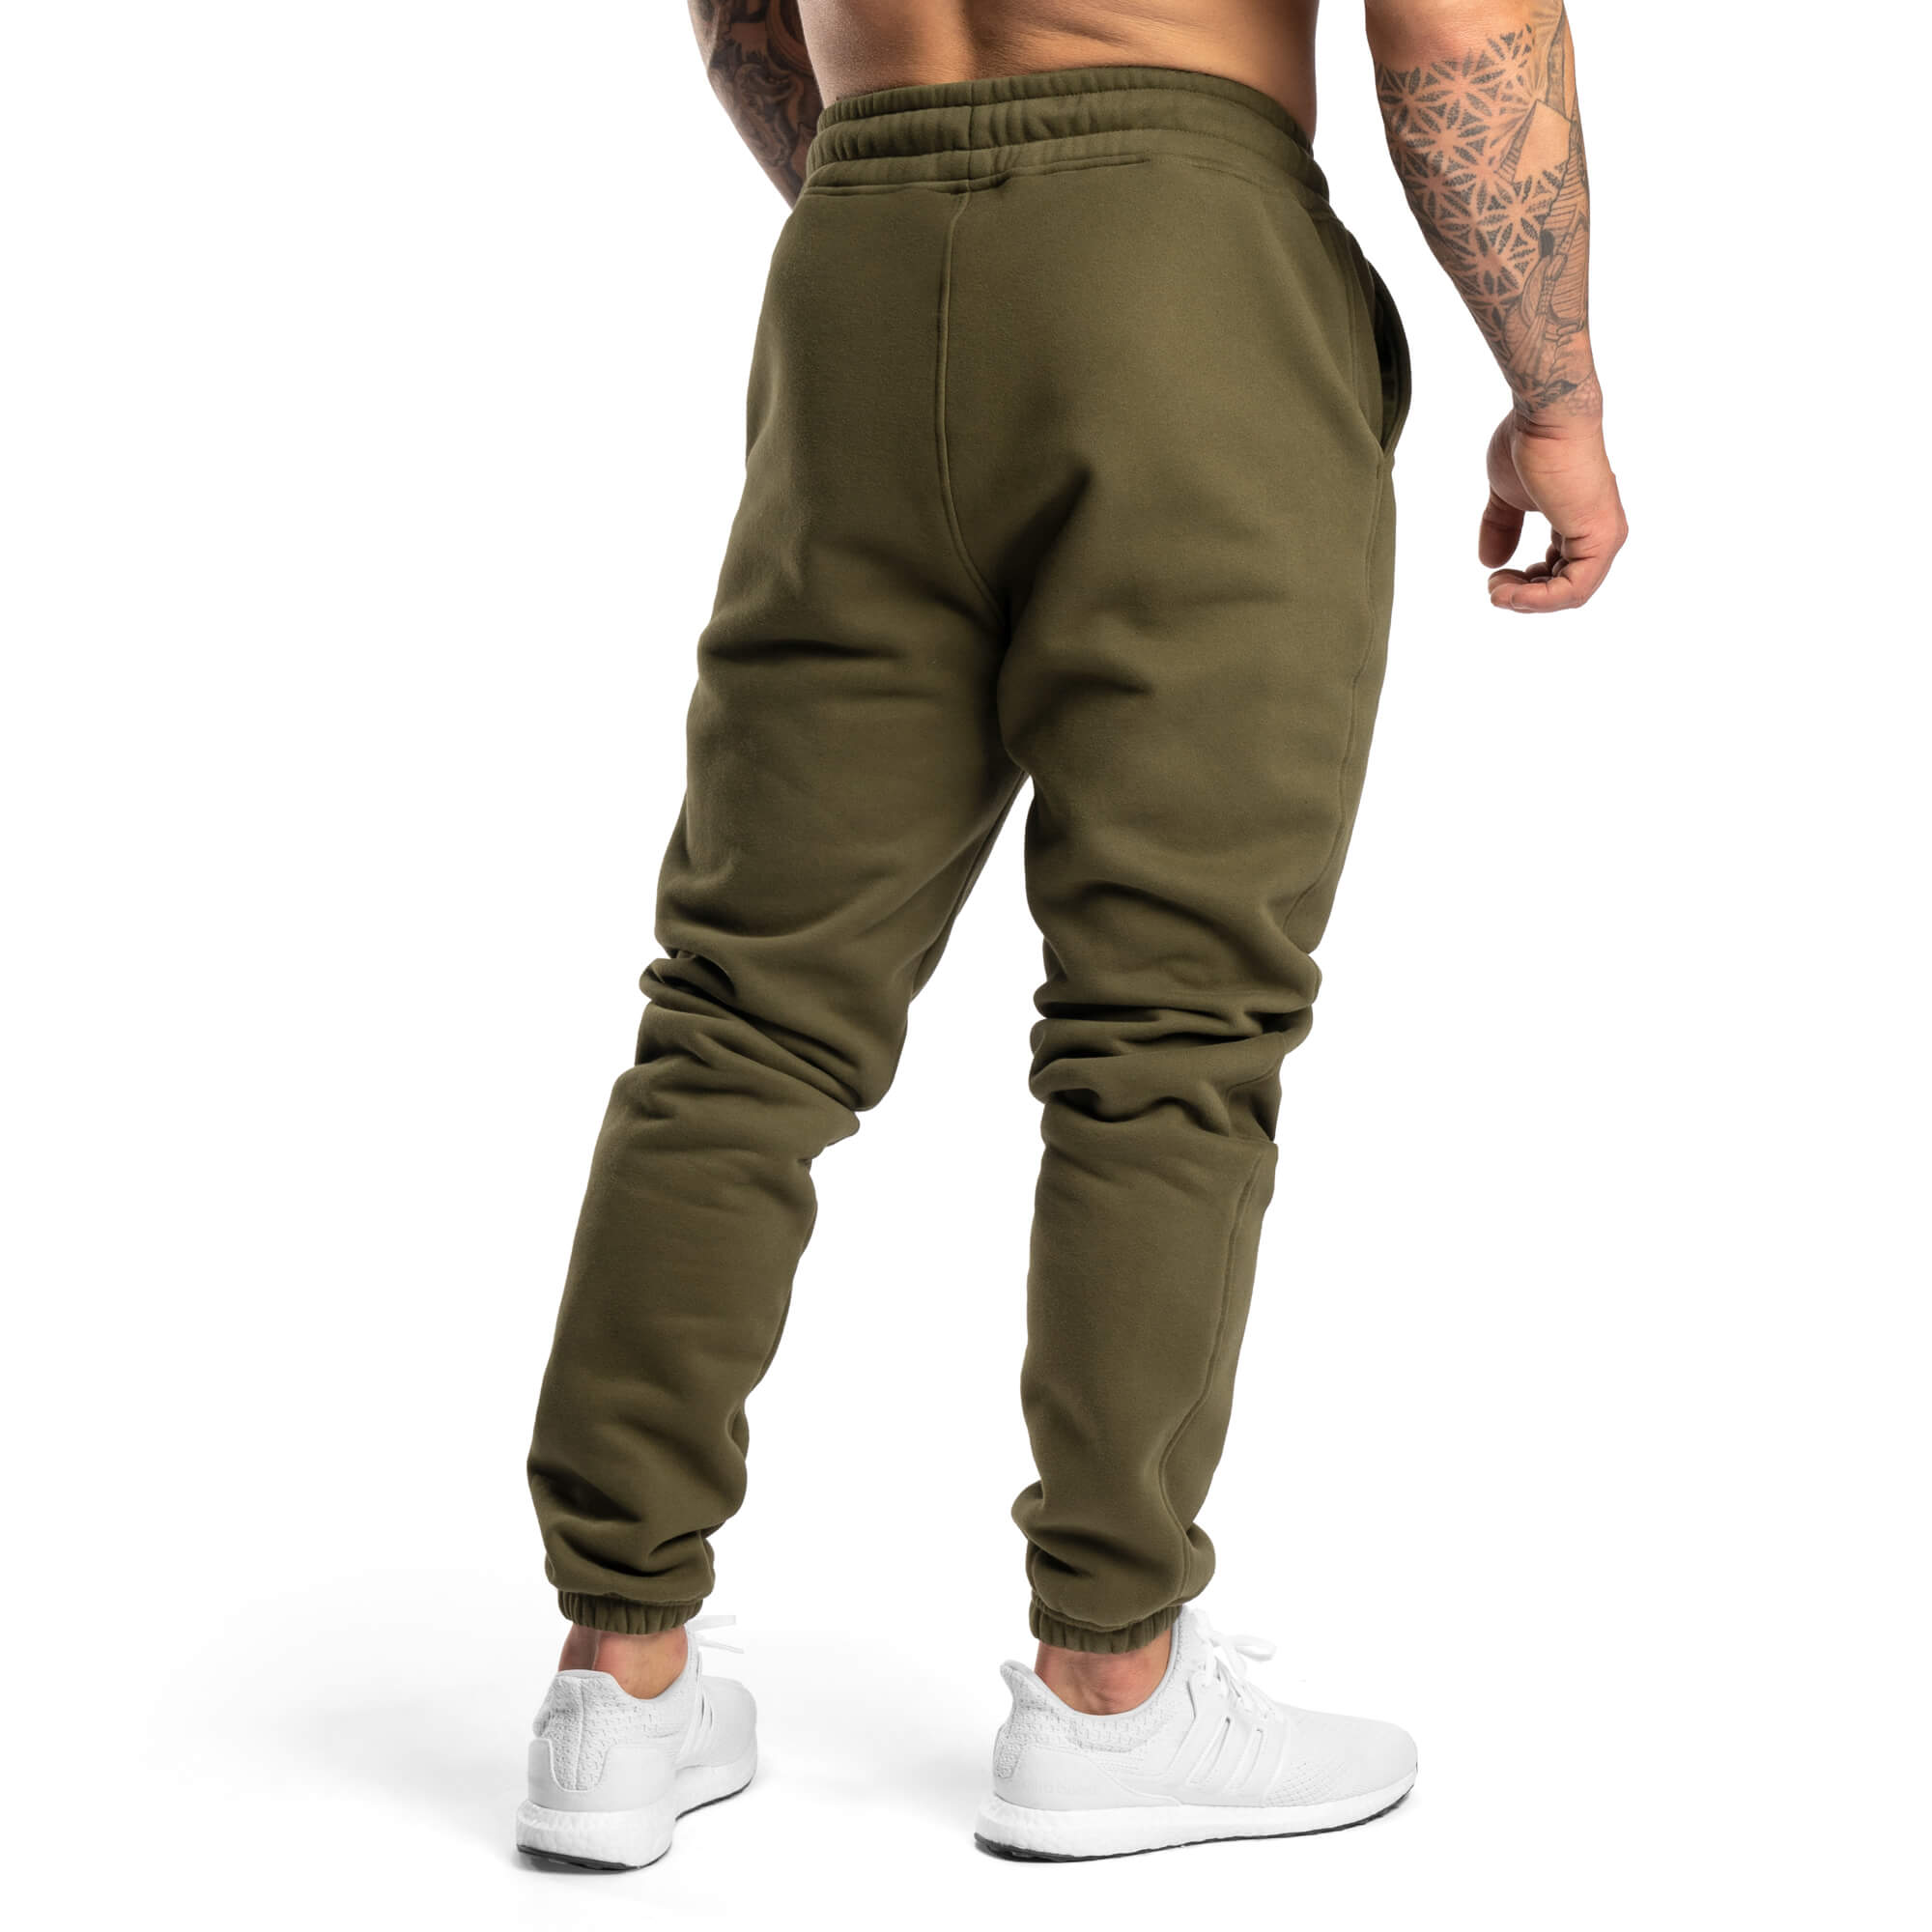 Comfy Joggers 2.0 - Army Green